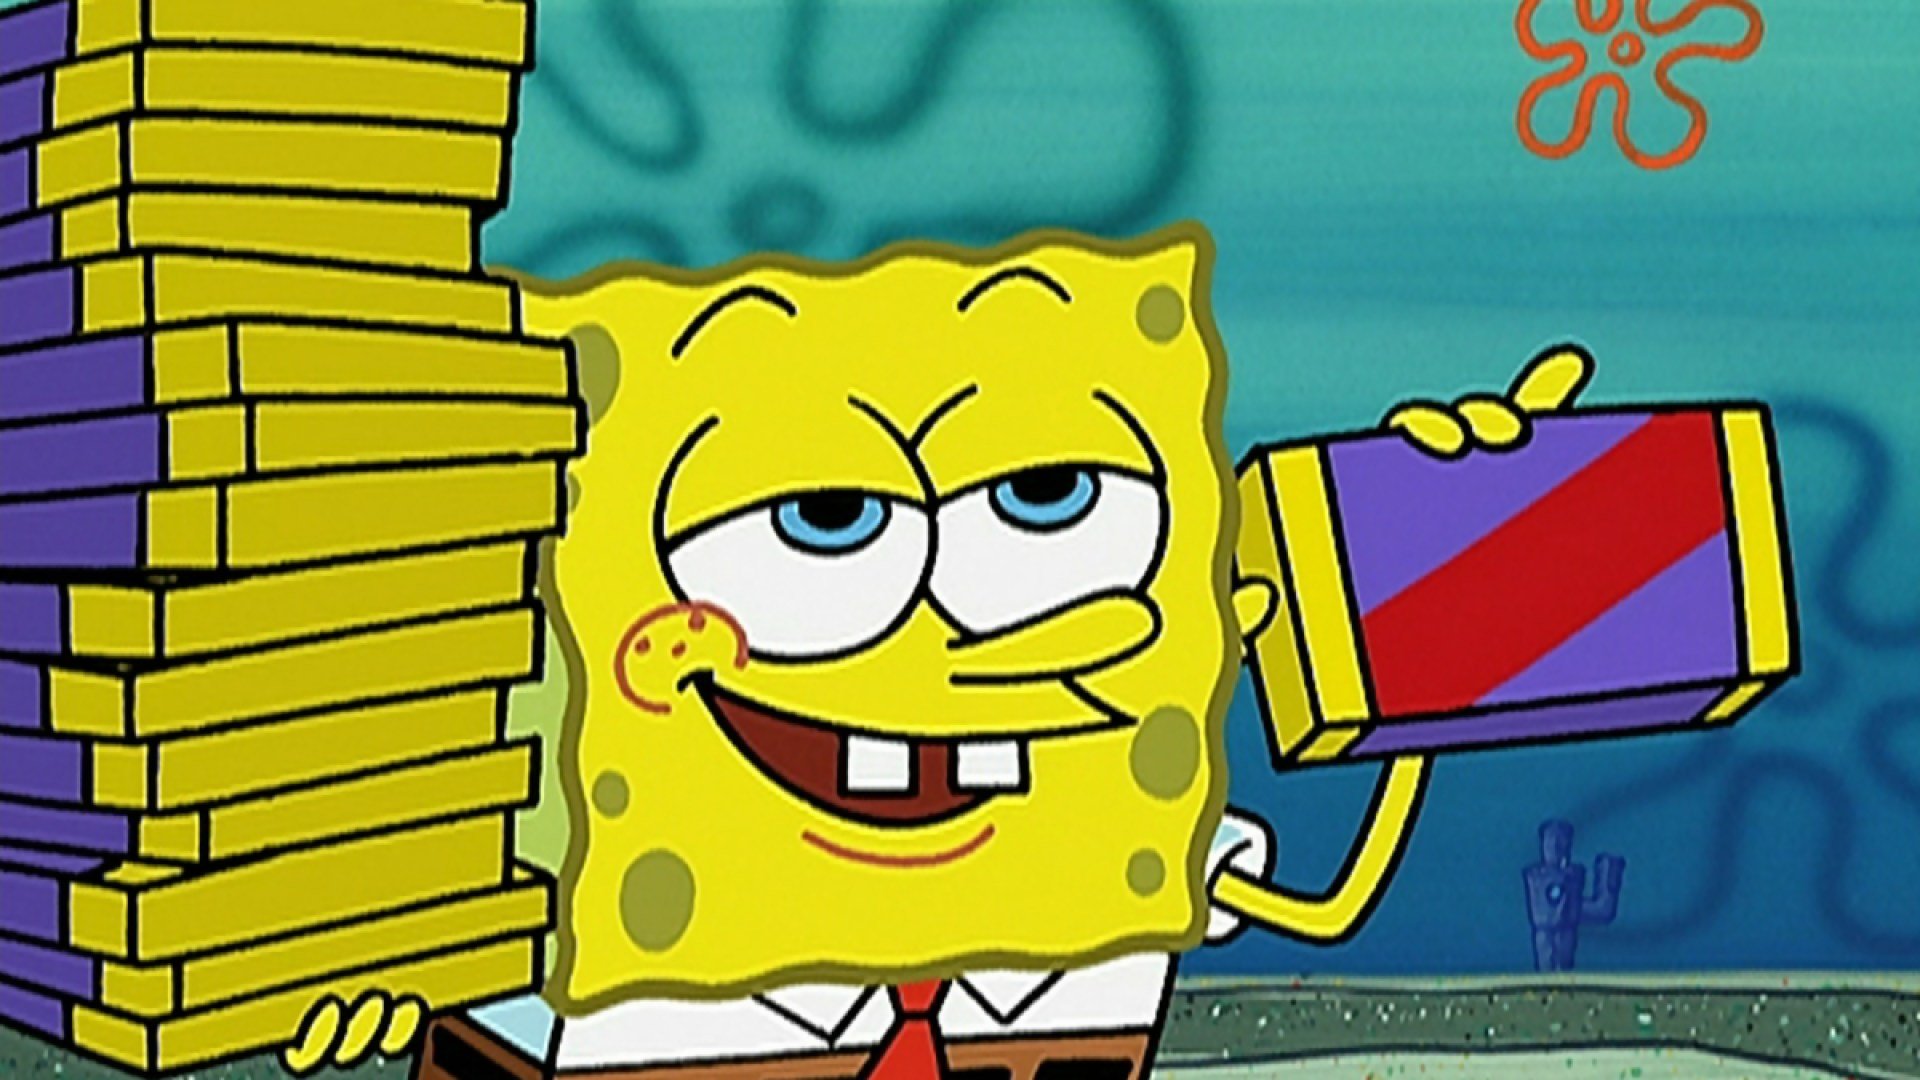 Spongebob trying to sell chocolate